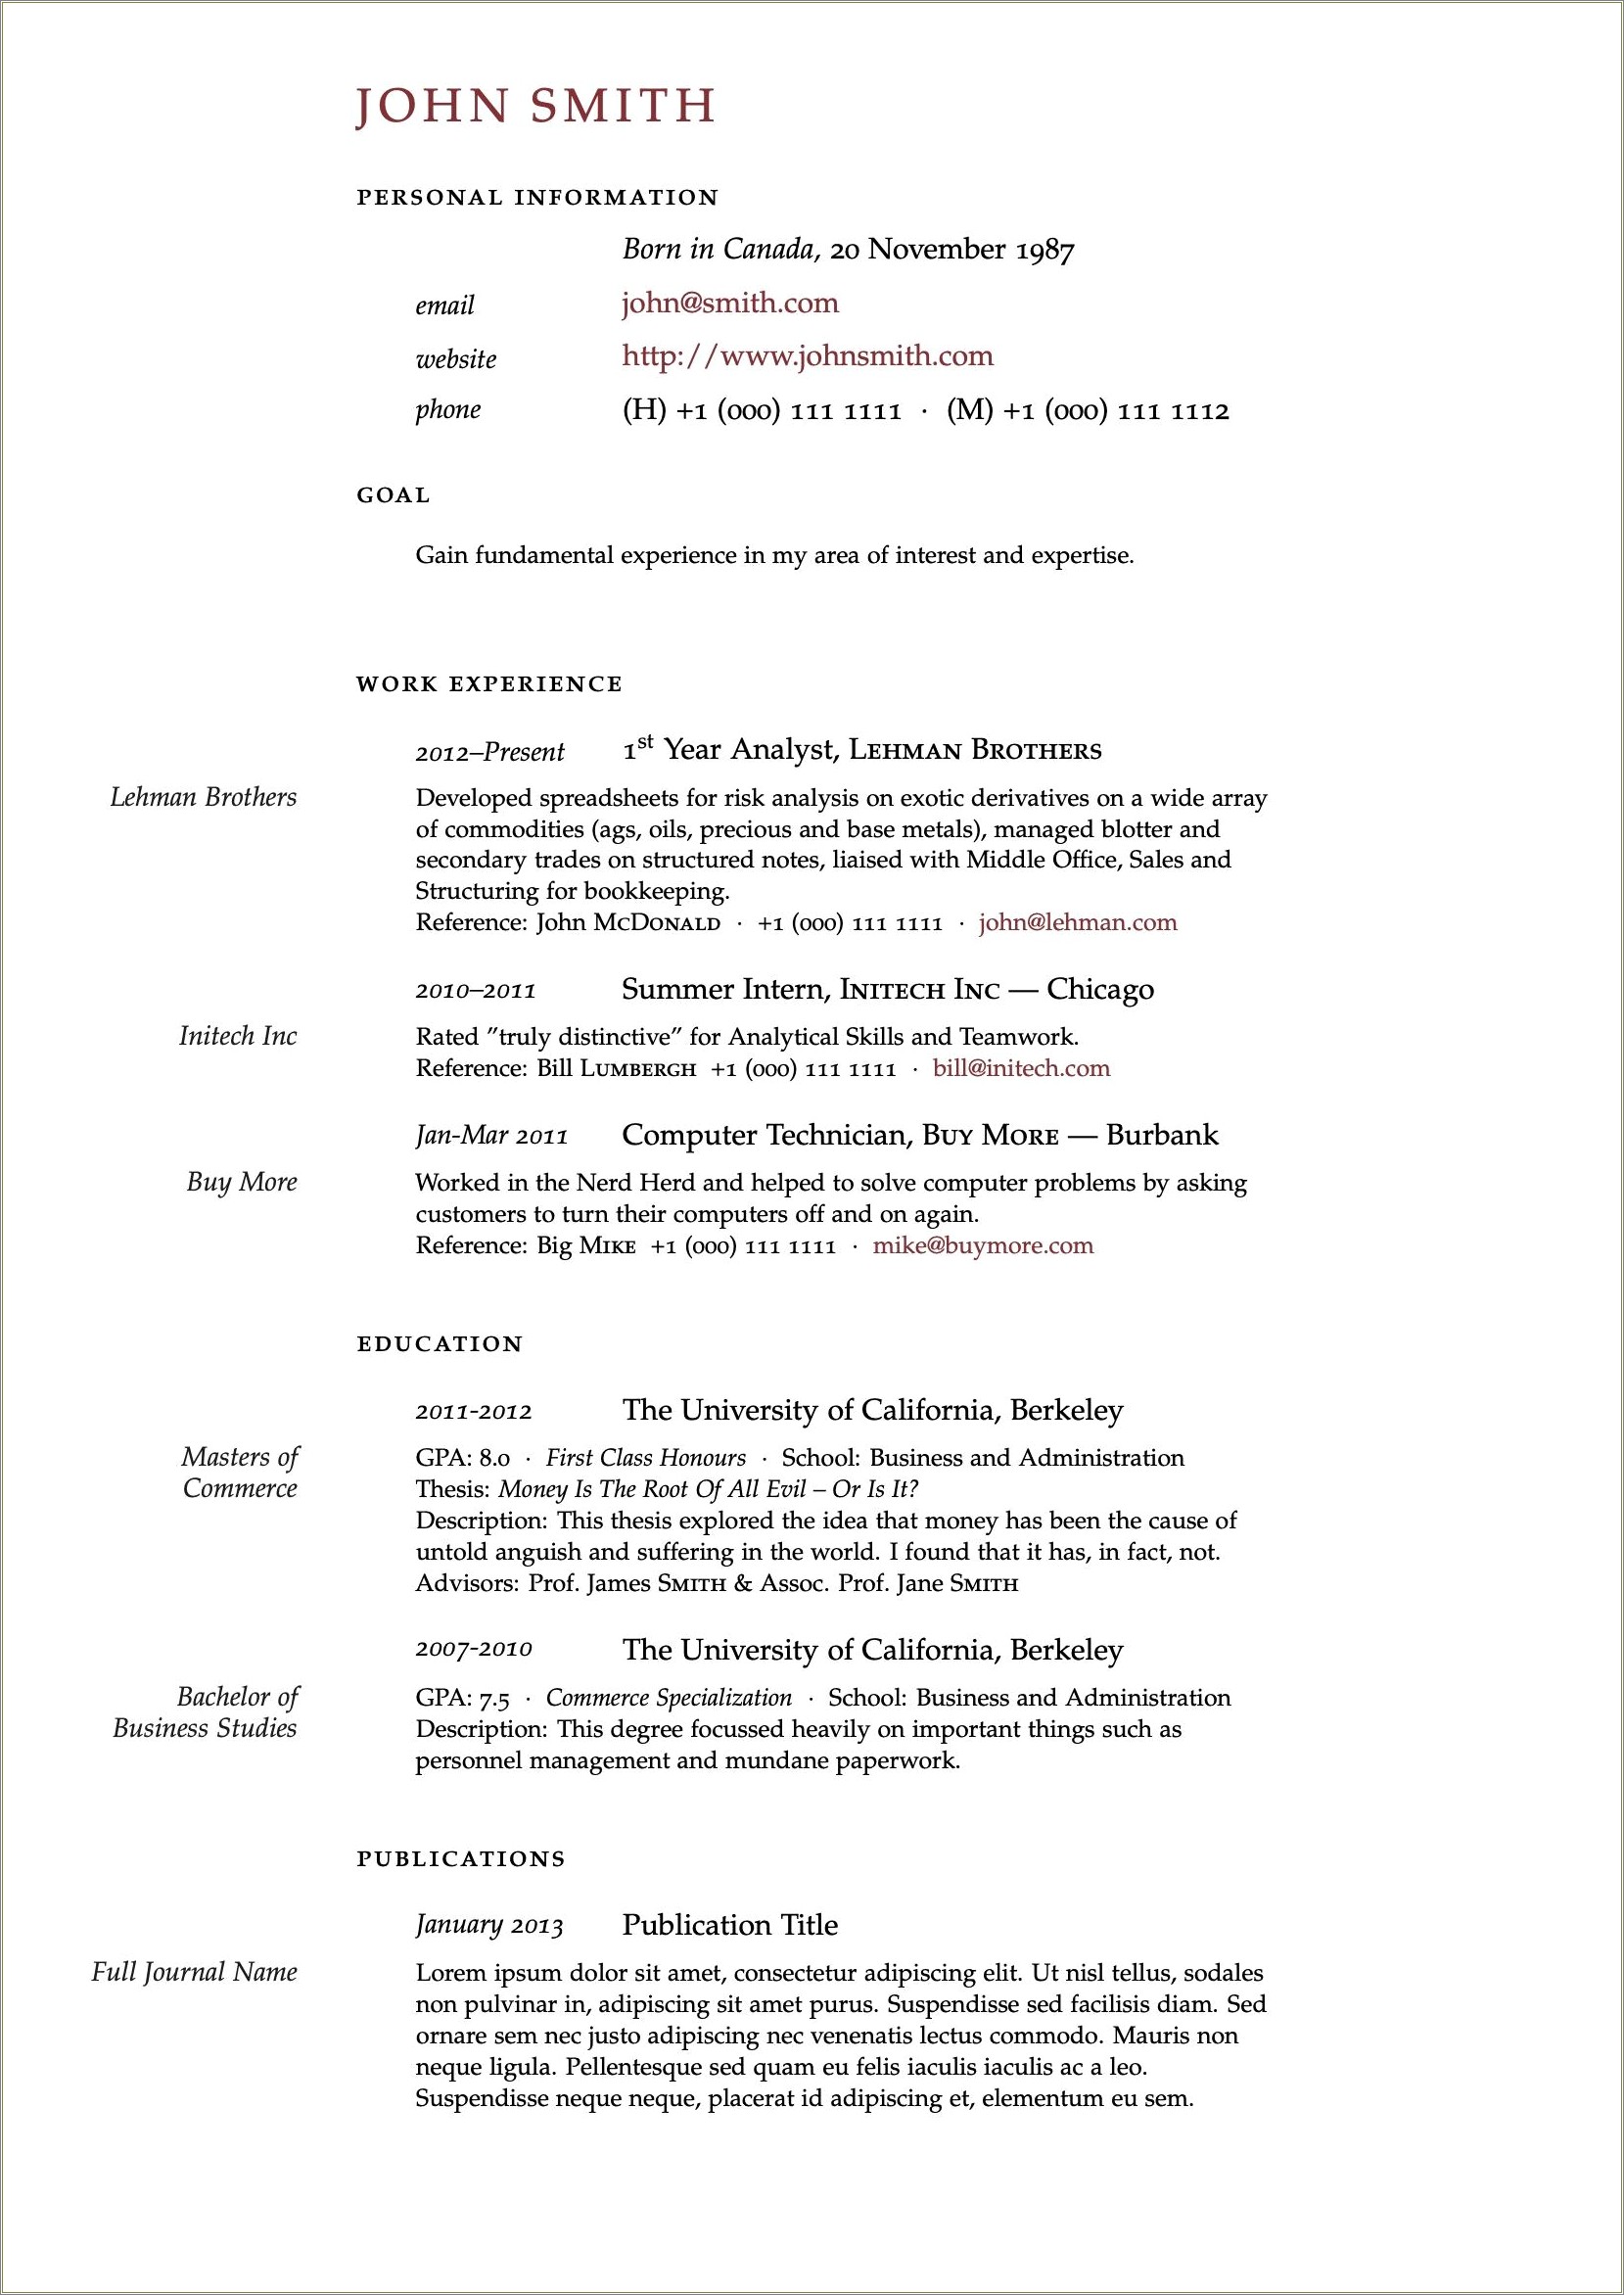 Where To Put Education Section On A Resume